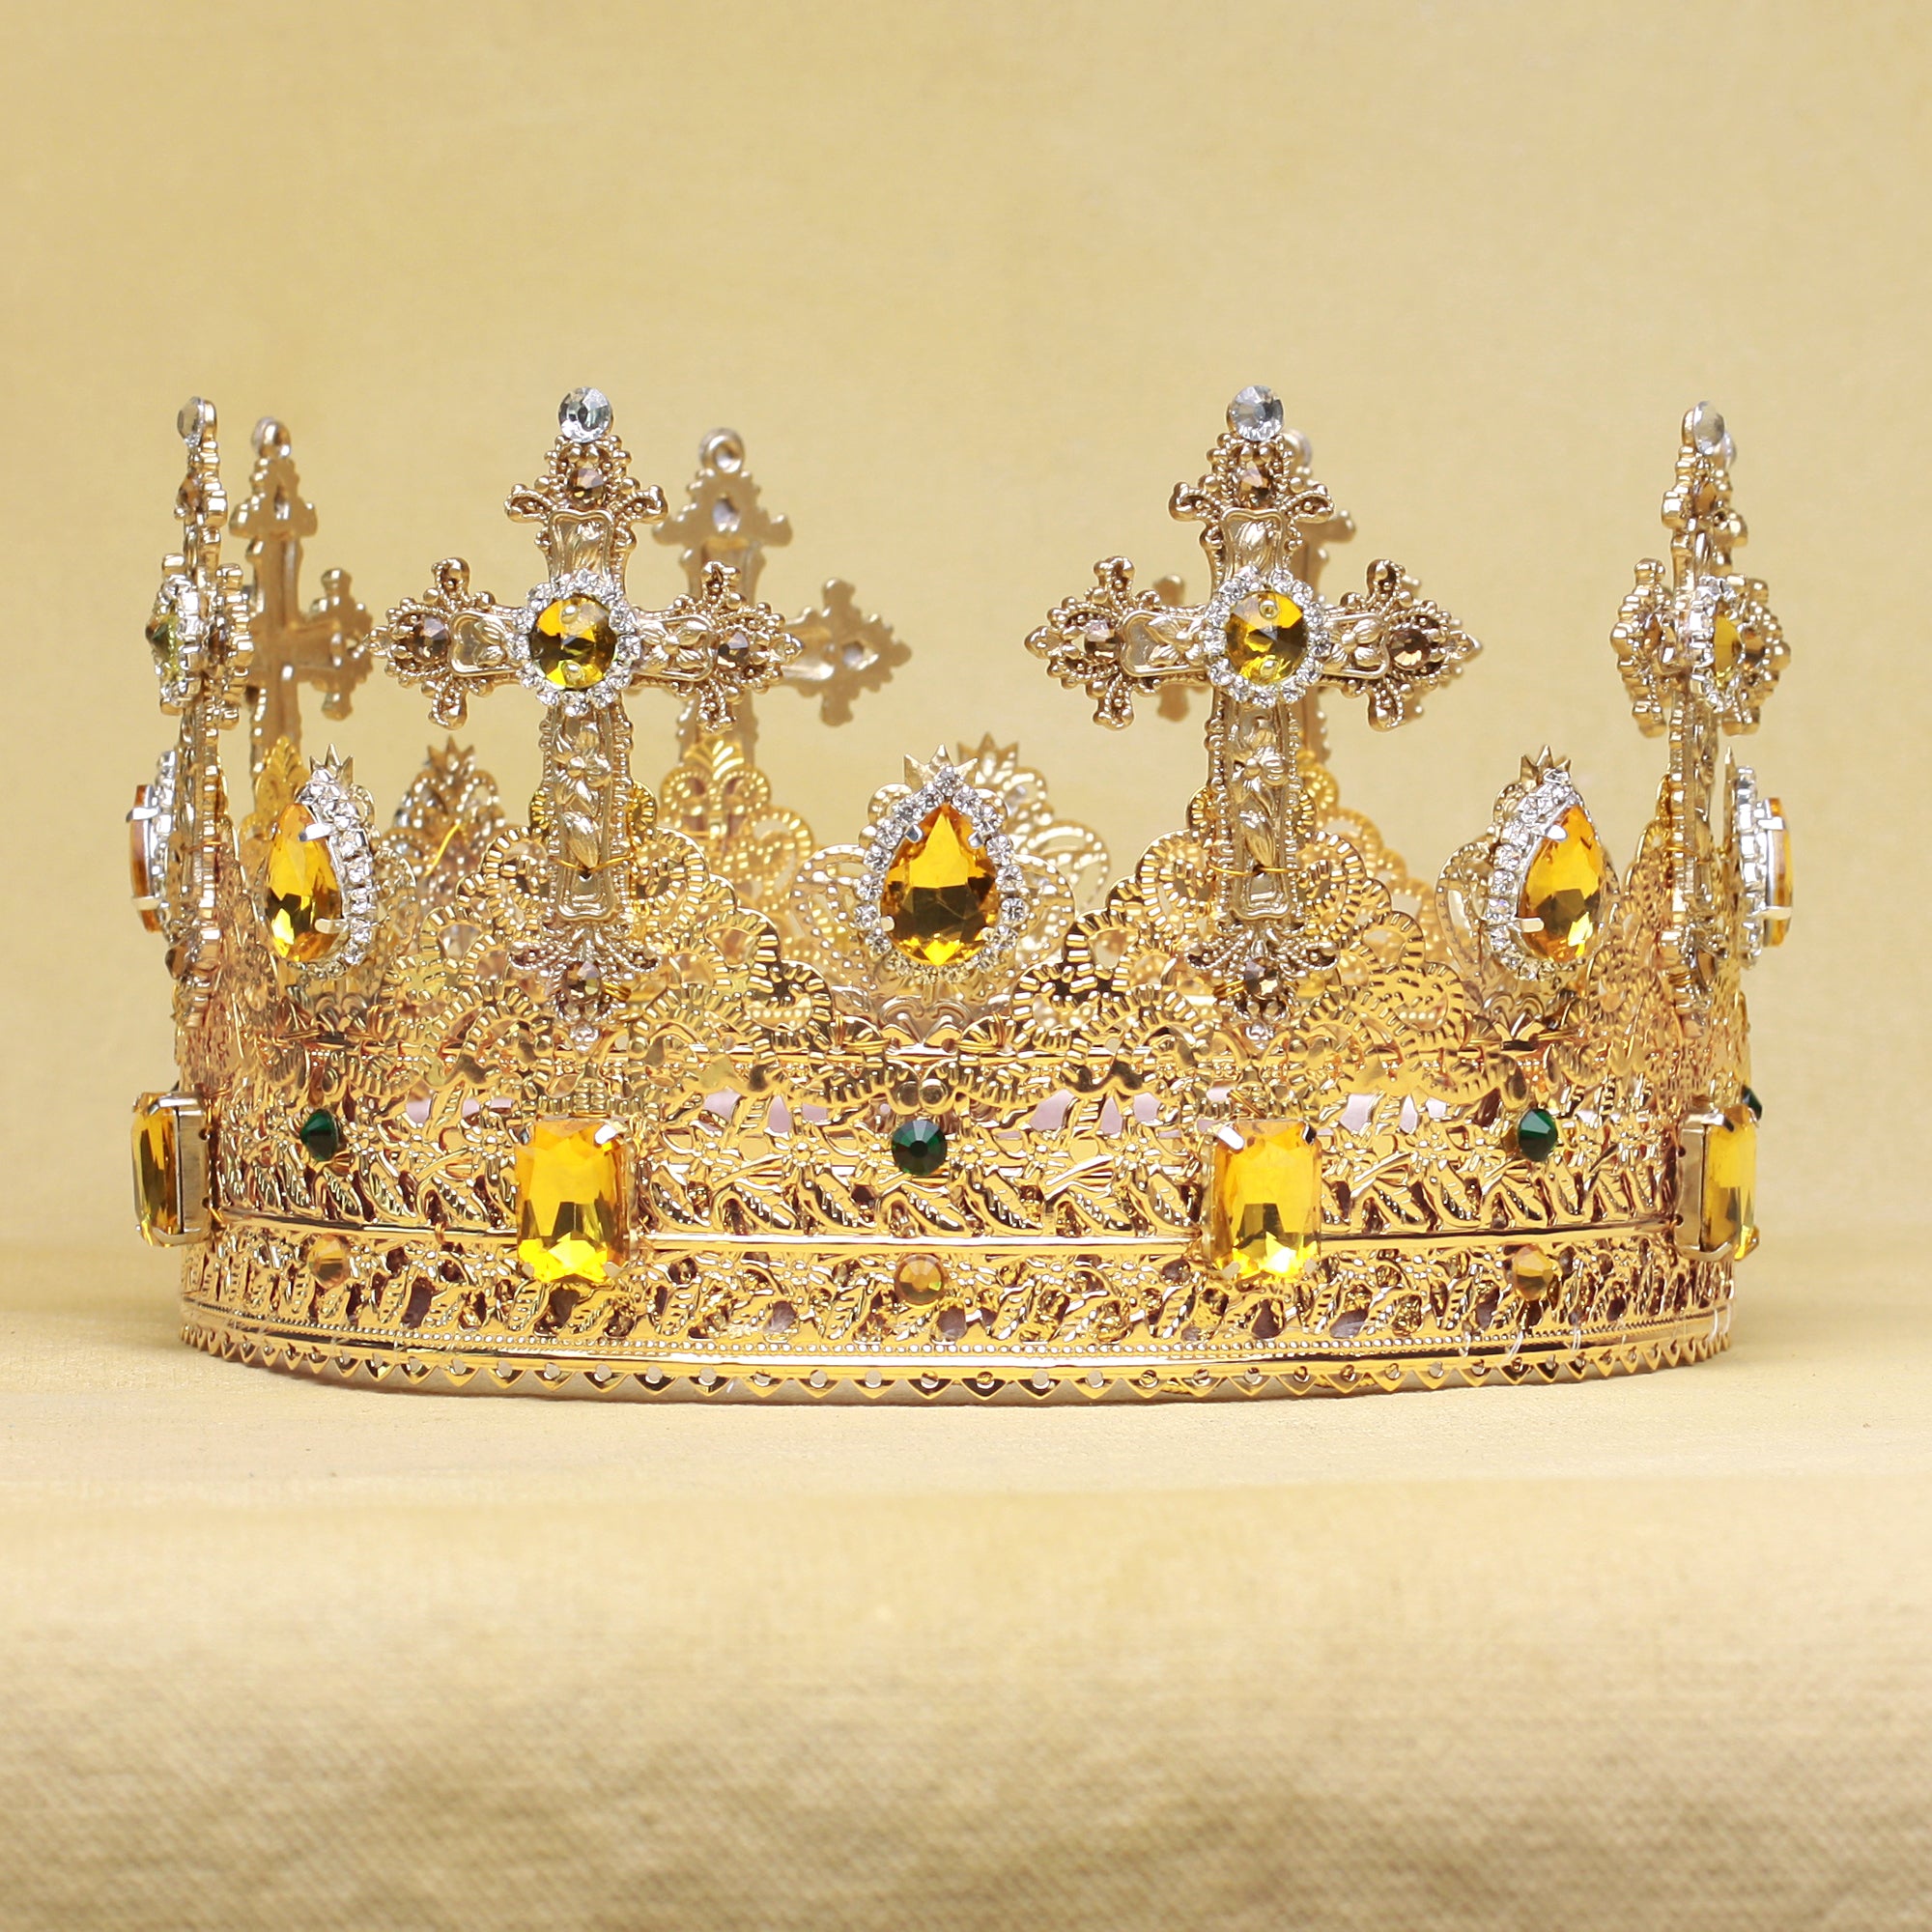 Download XERXES King Crown, King Crown Gold p, Yellow Crown - olenagrin